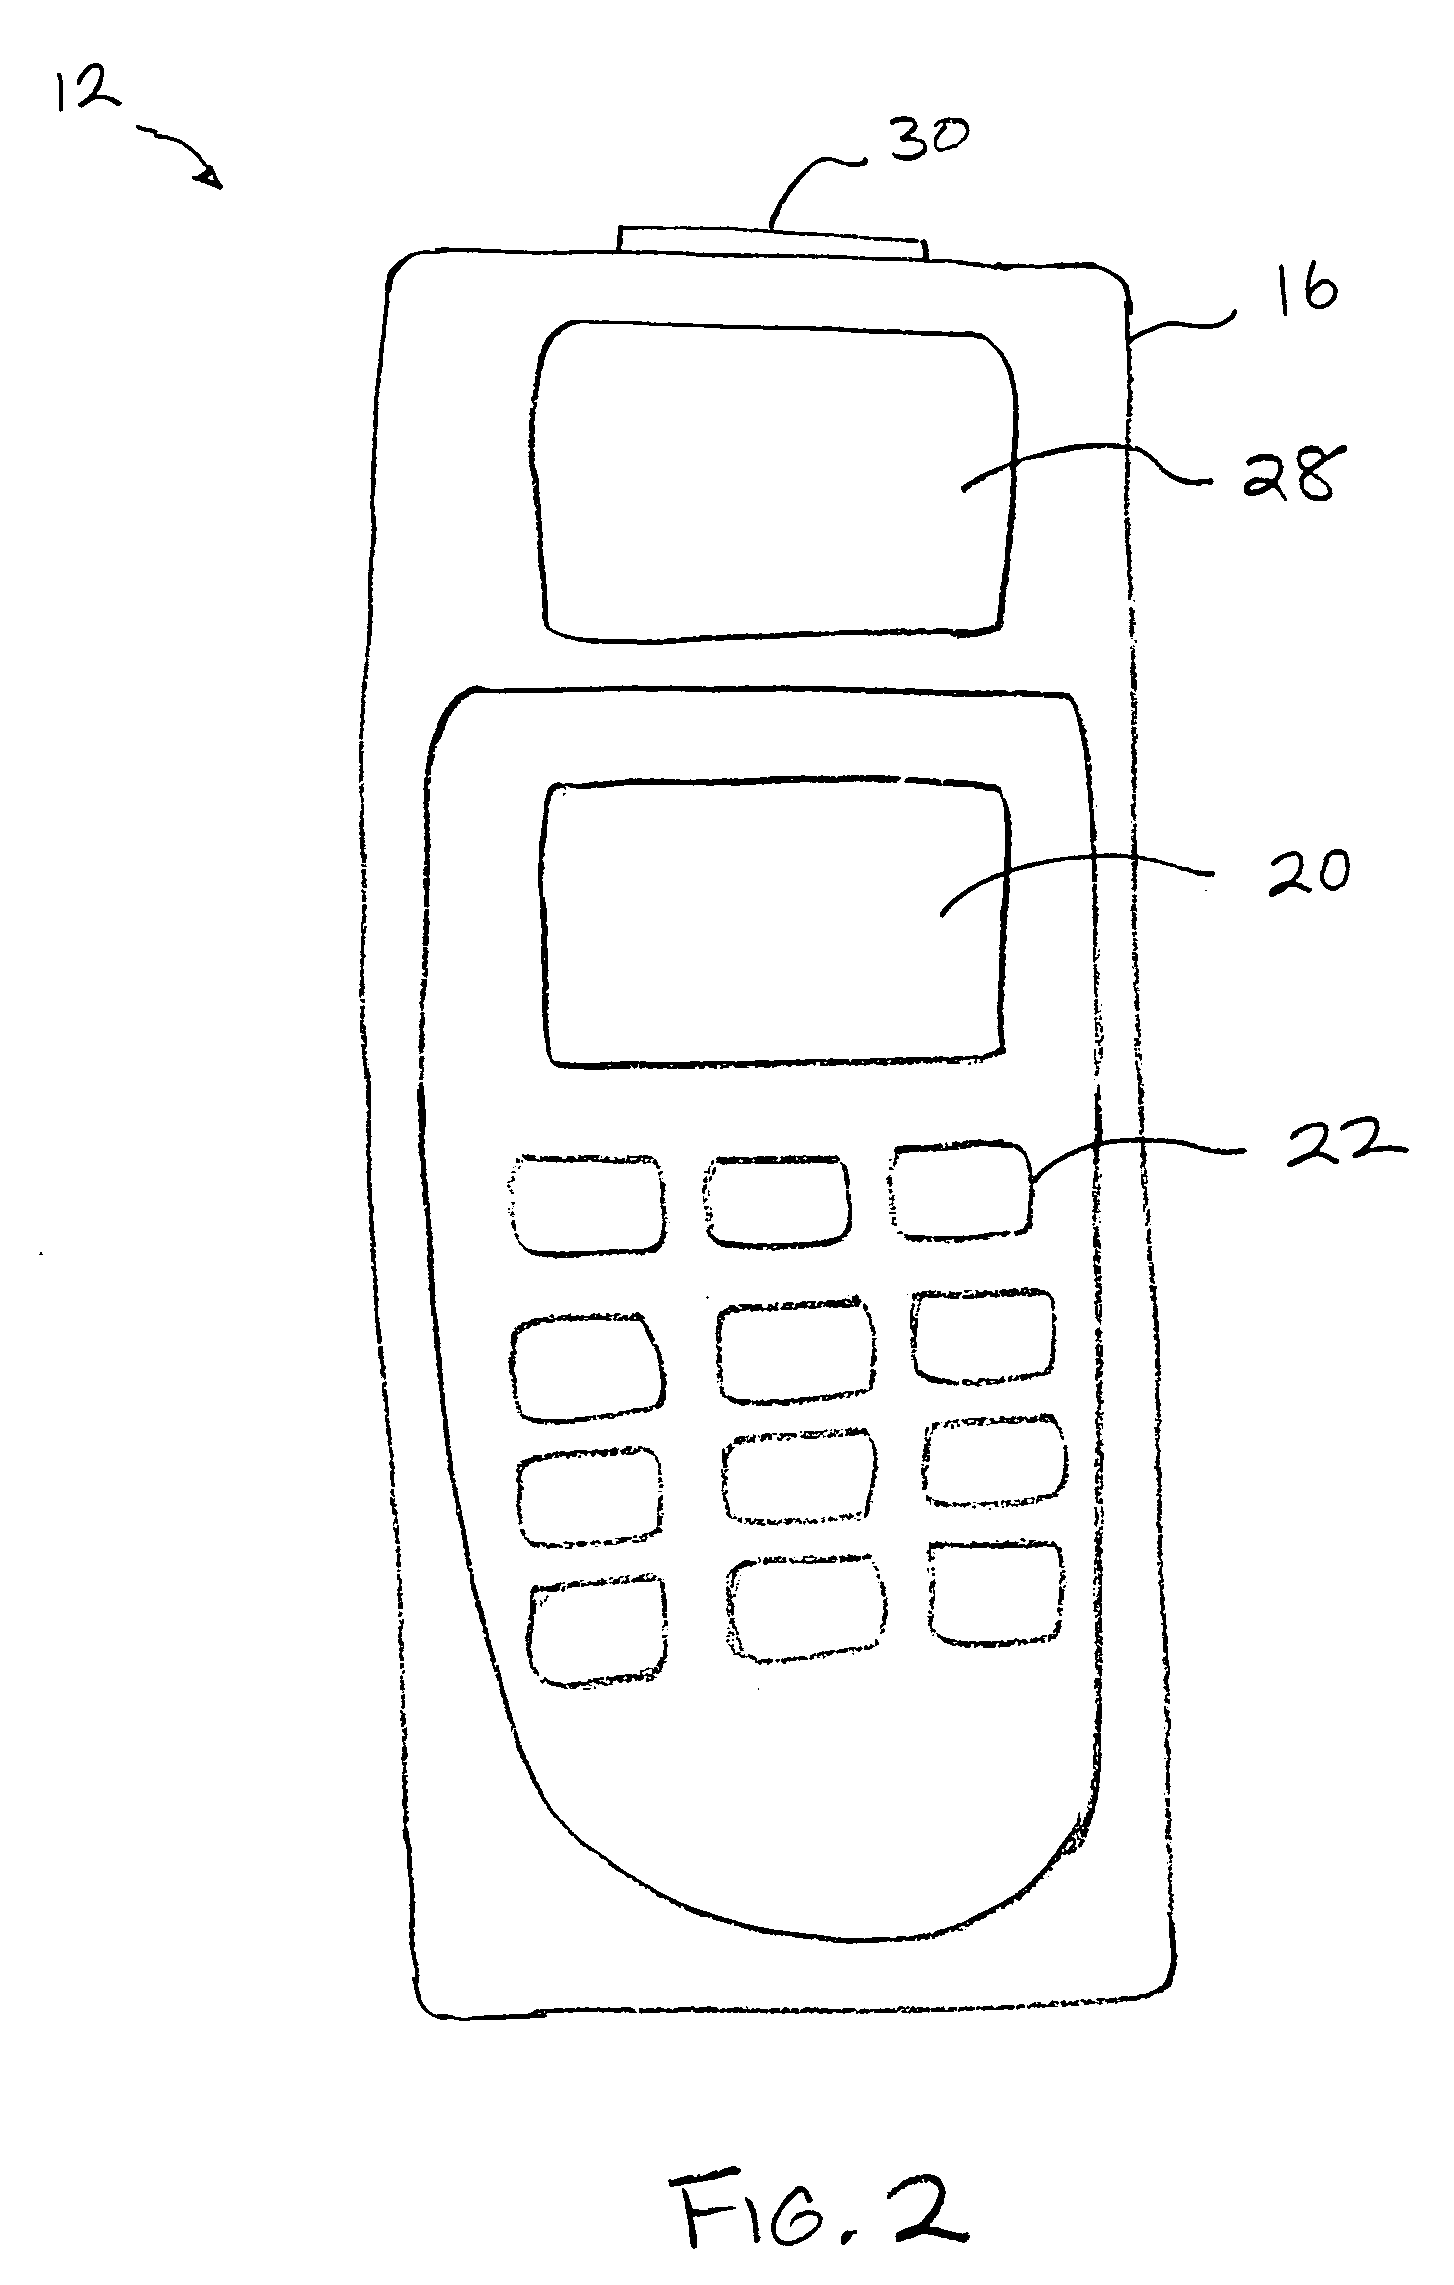 Alarm system with a plurality of interactive alarm units